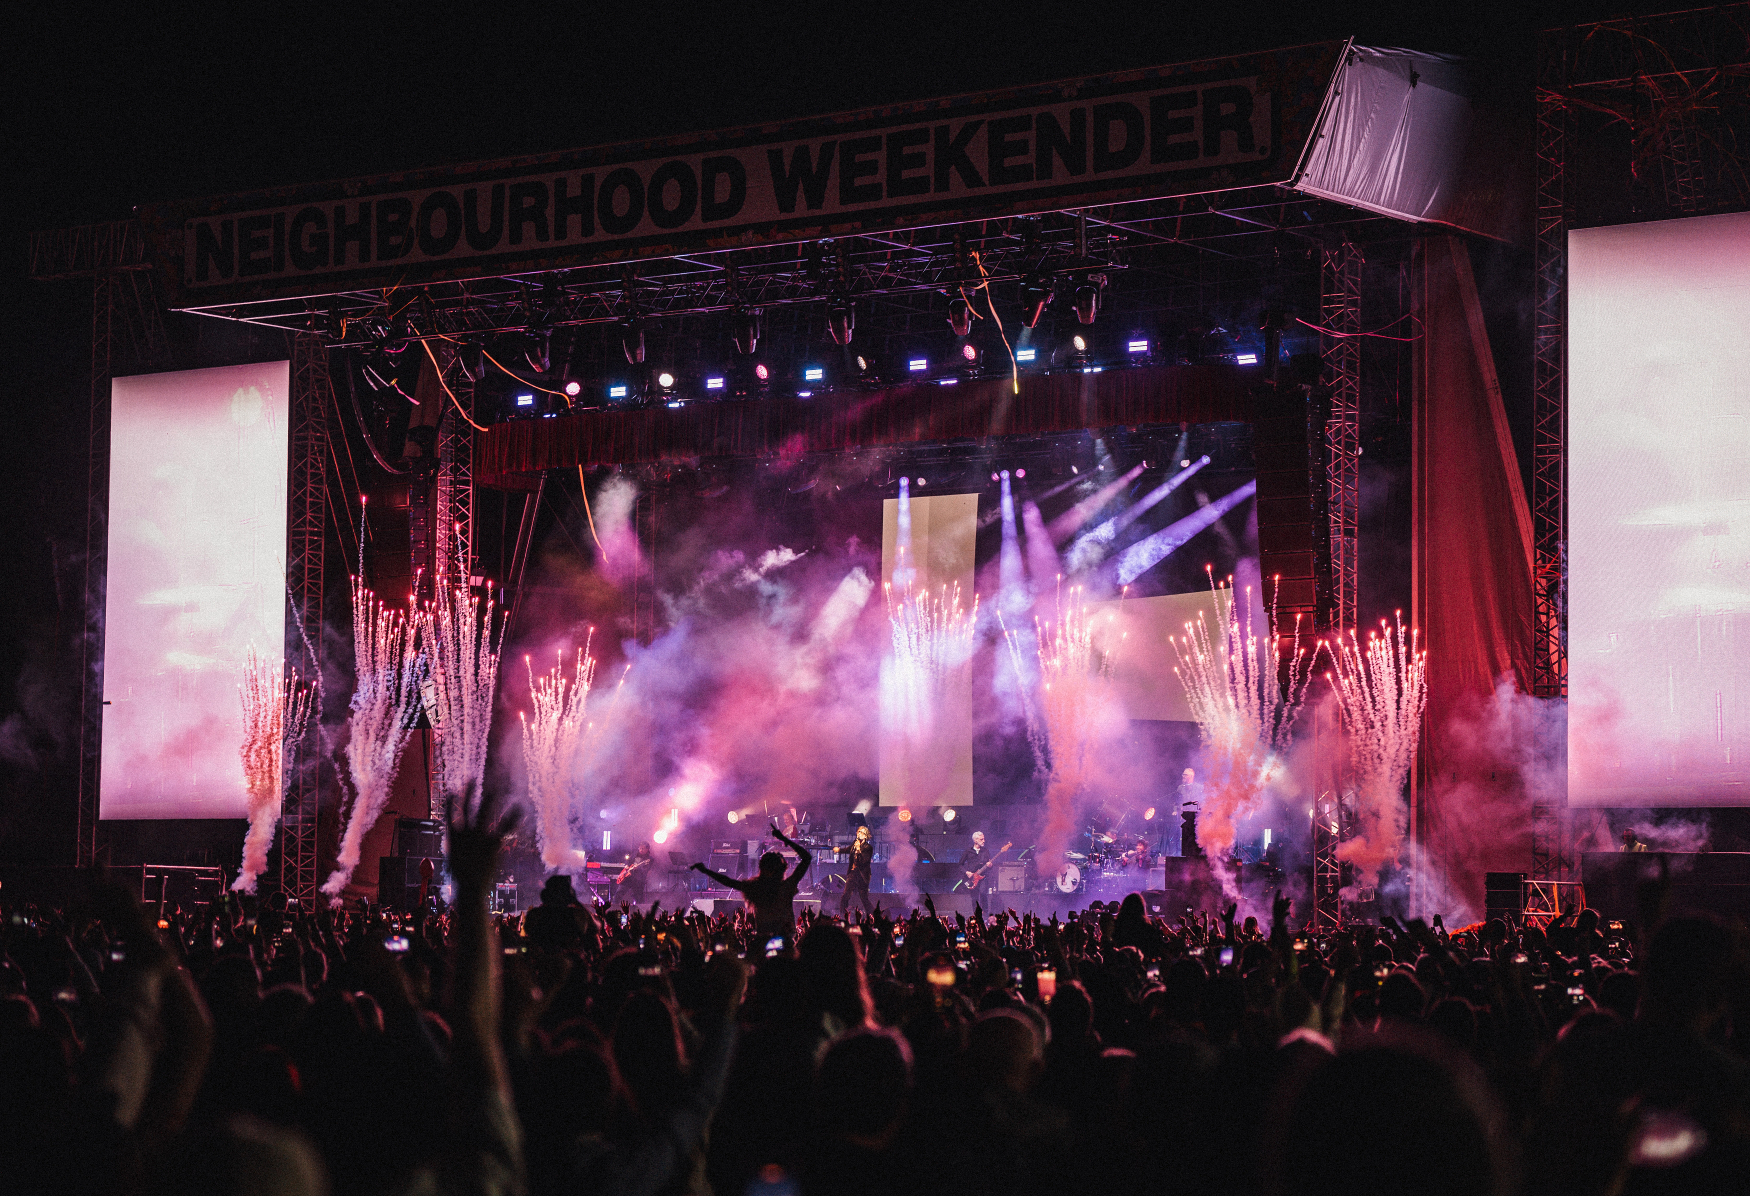 Everything you need to know about Neighbourhood Weekender 2023